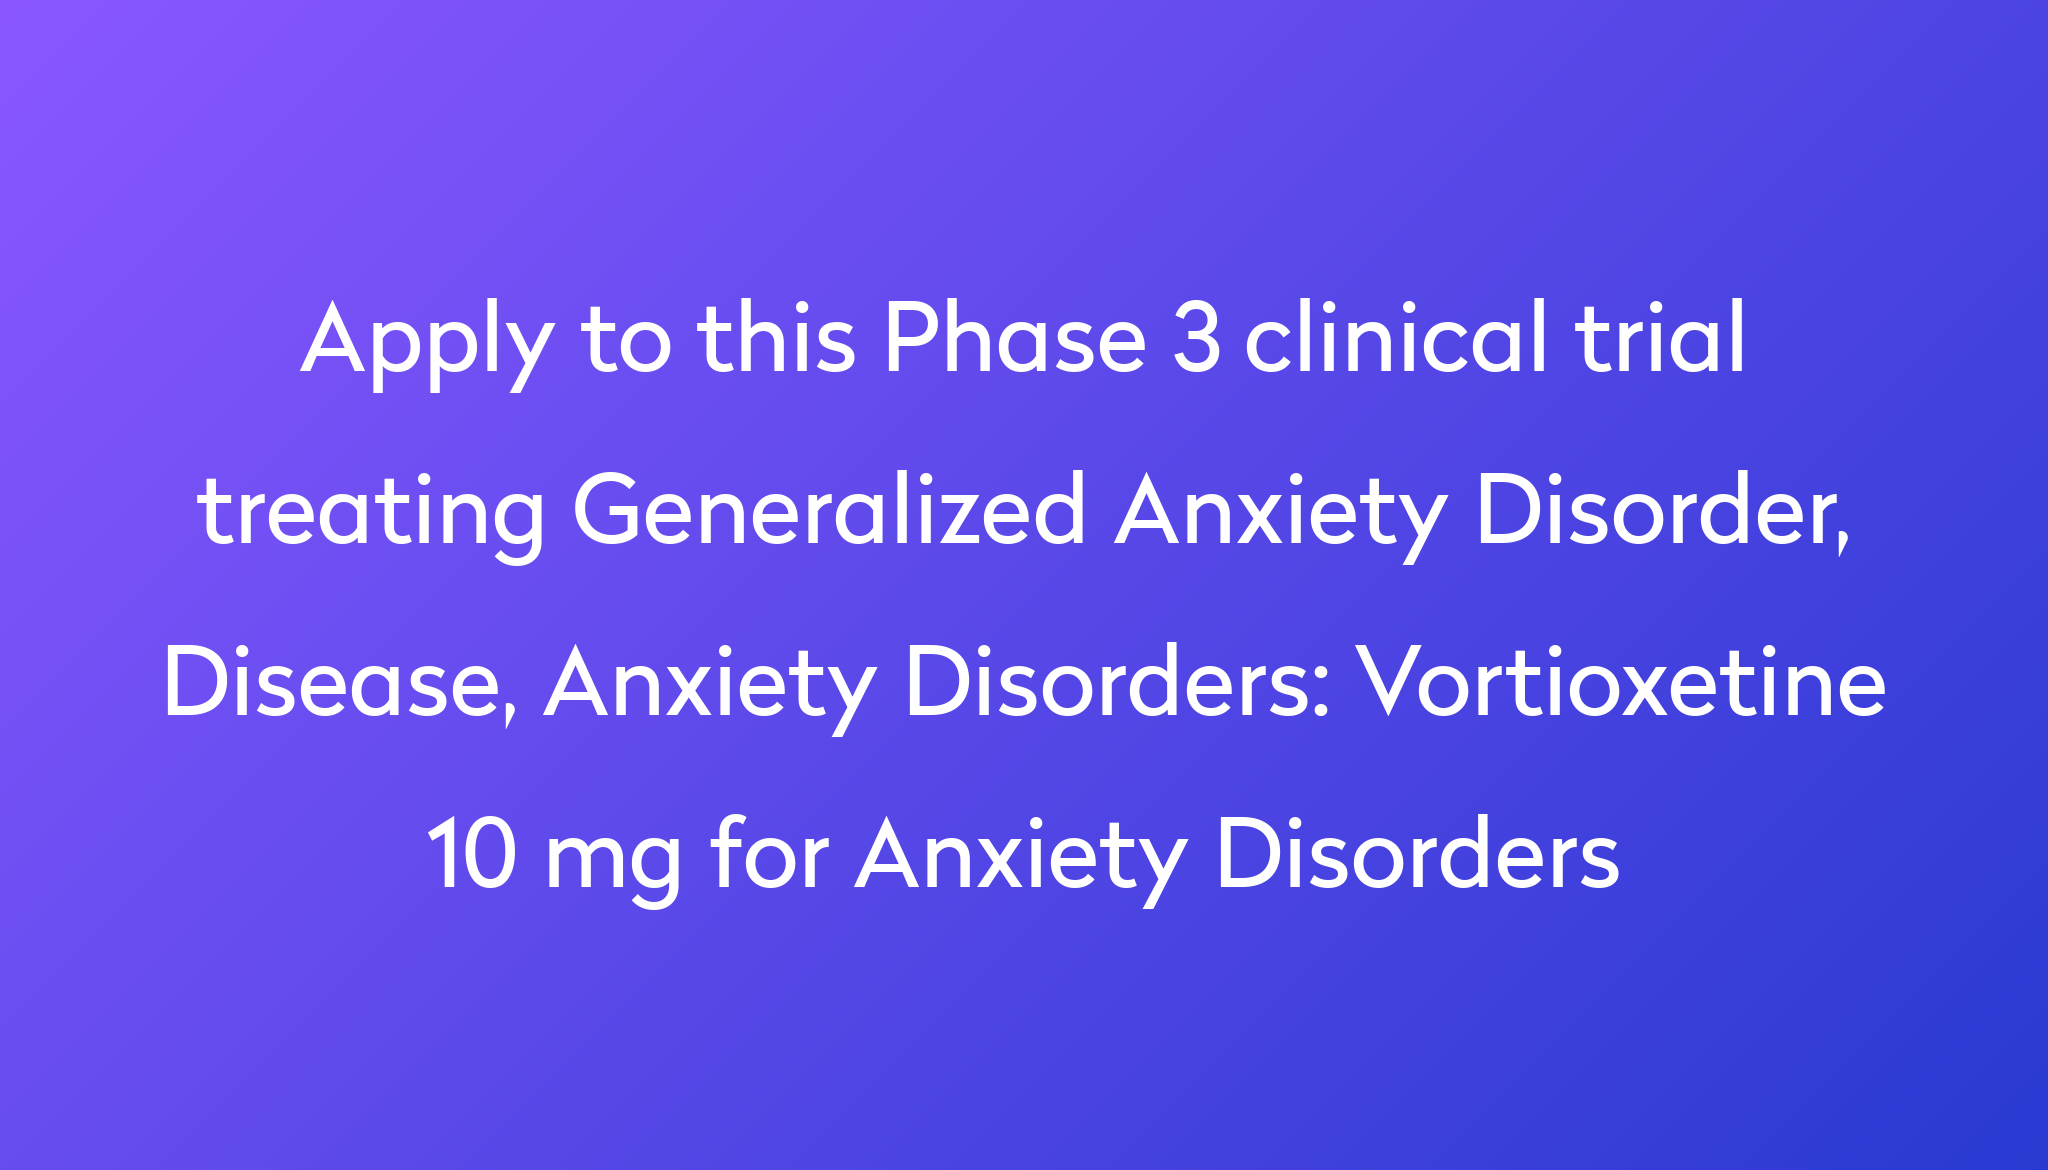 Vortioxetine 10 Mg For Anxiety Disorders Clinical Trial 2022 Power